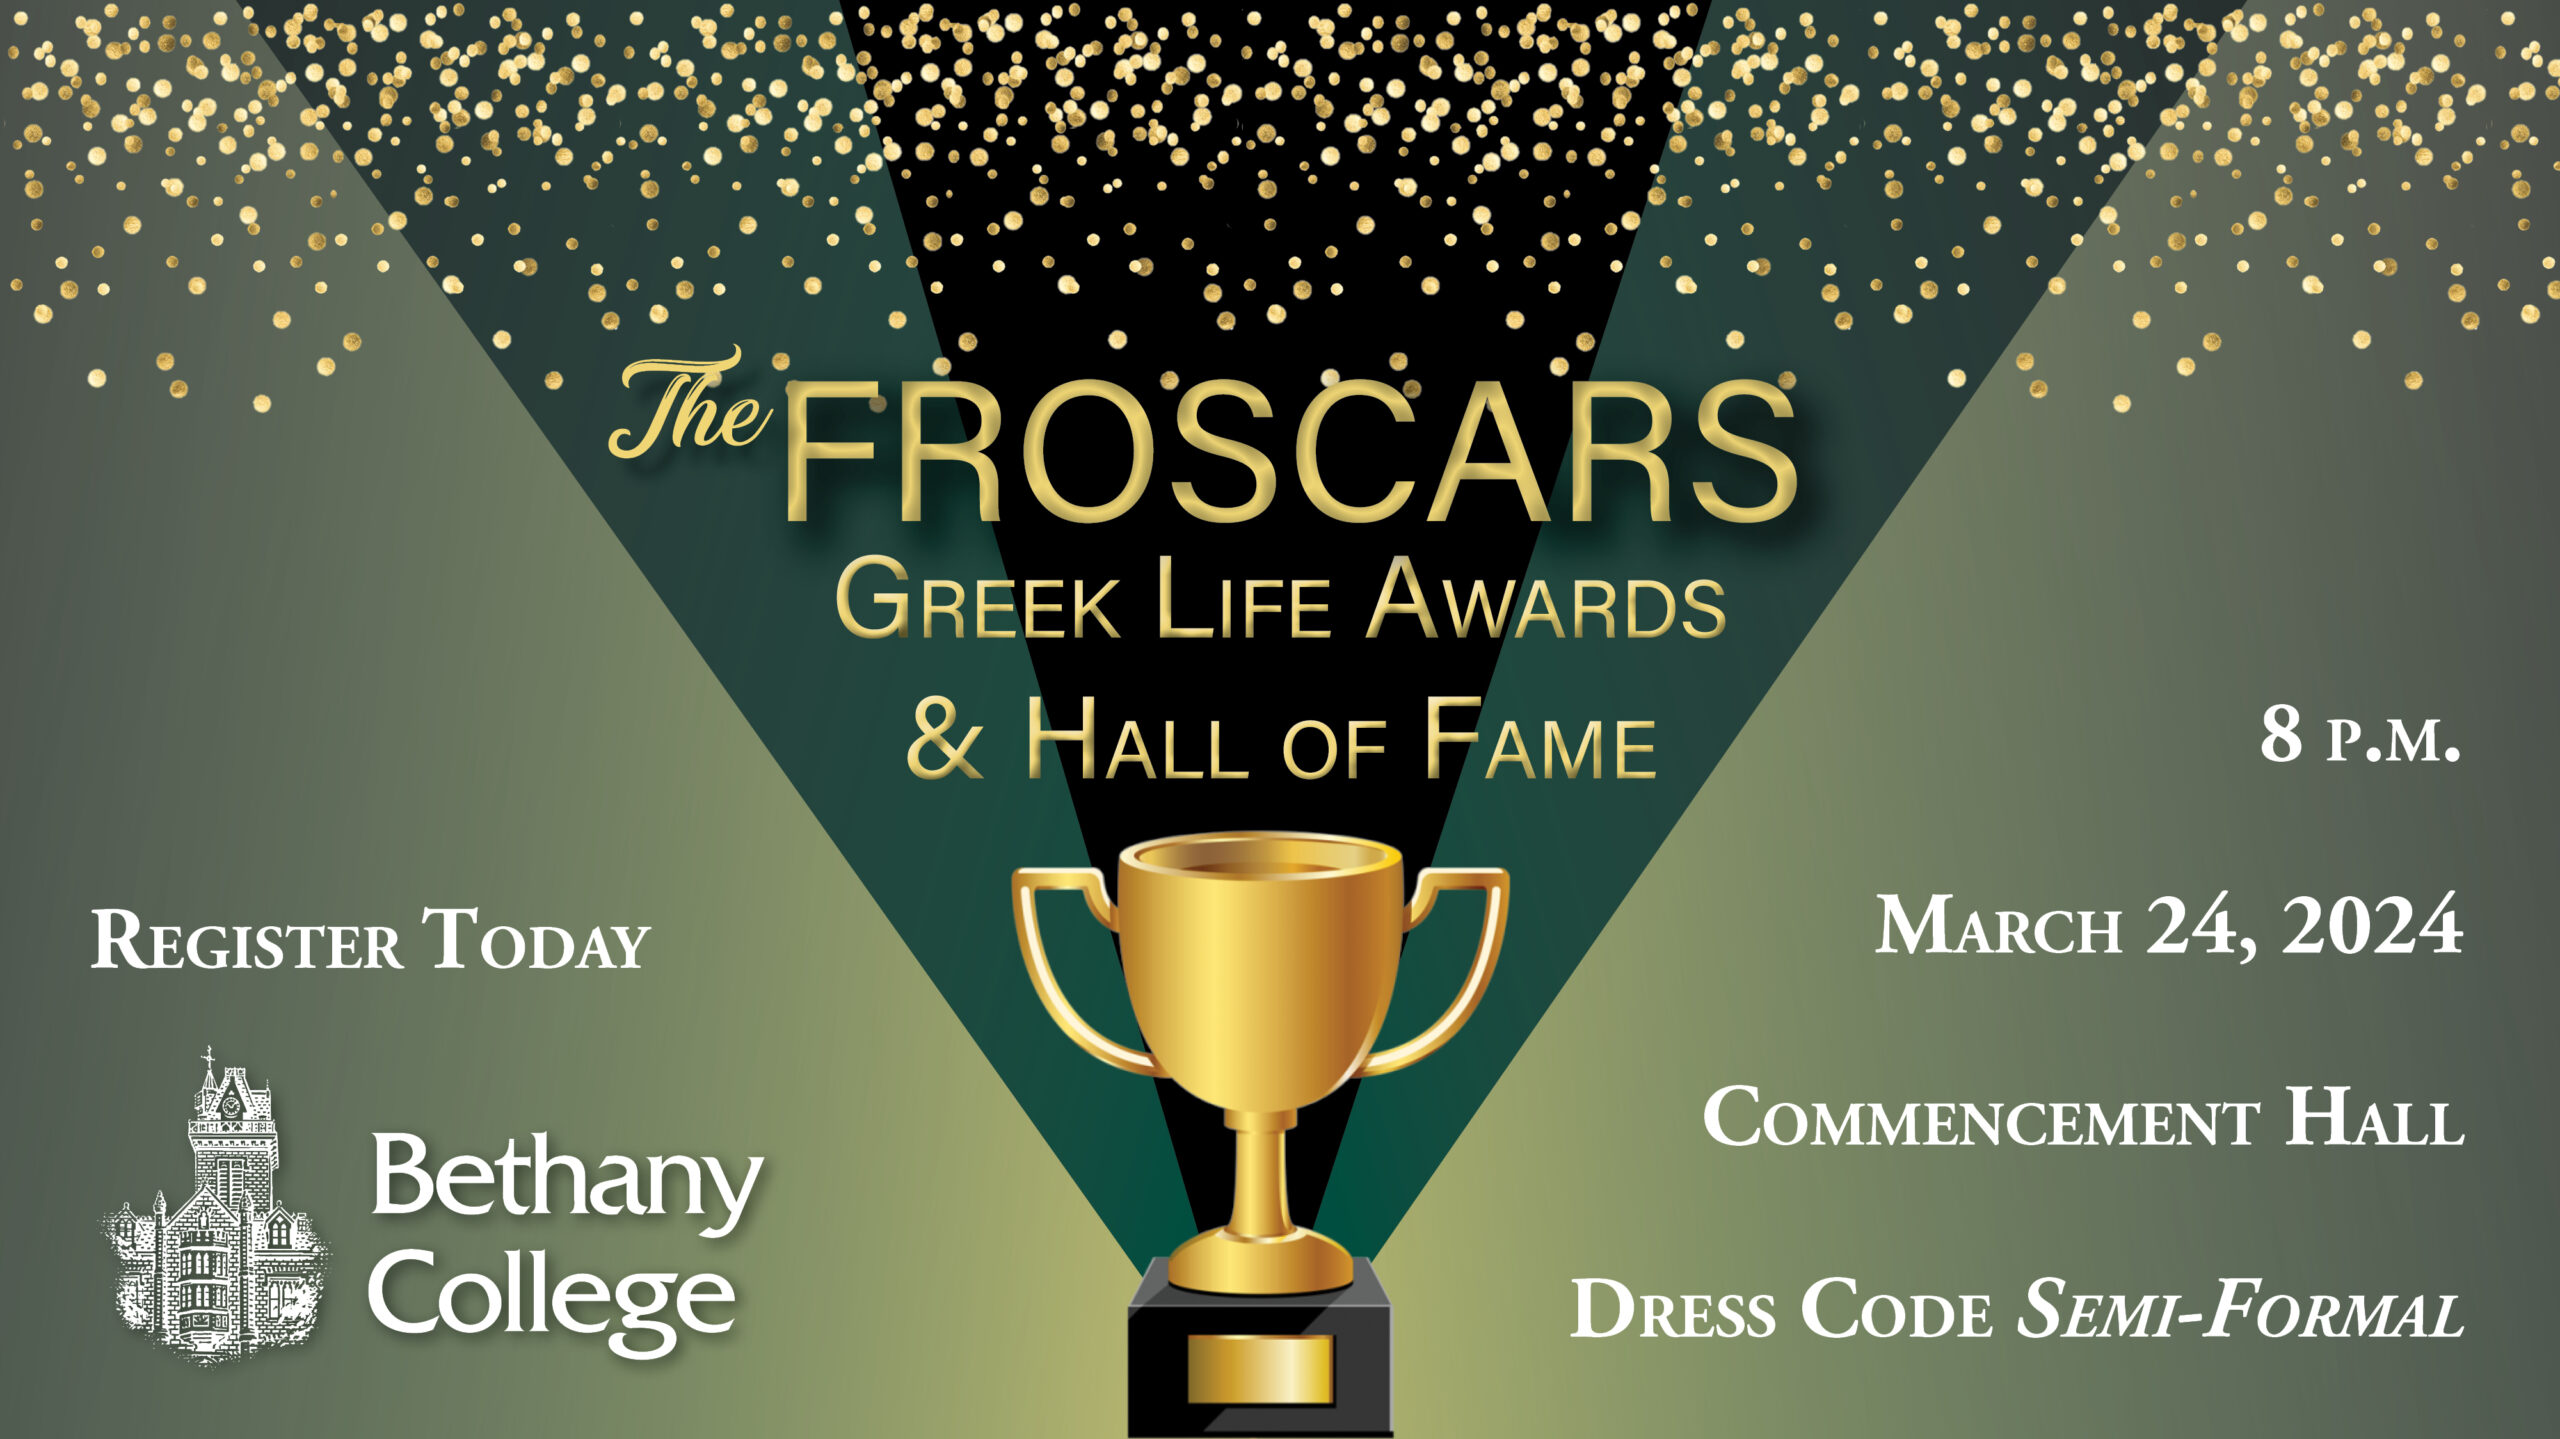 Bethany College is hosting the Froscars at 8 p.m. in Commencement Hall on March 24. Register Today!